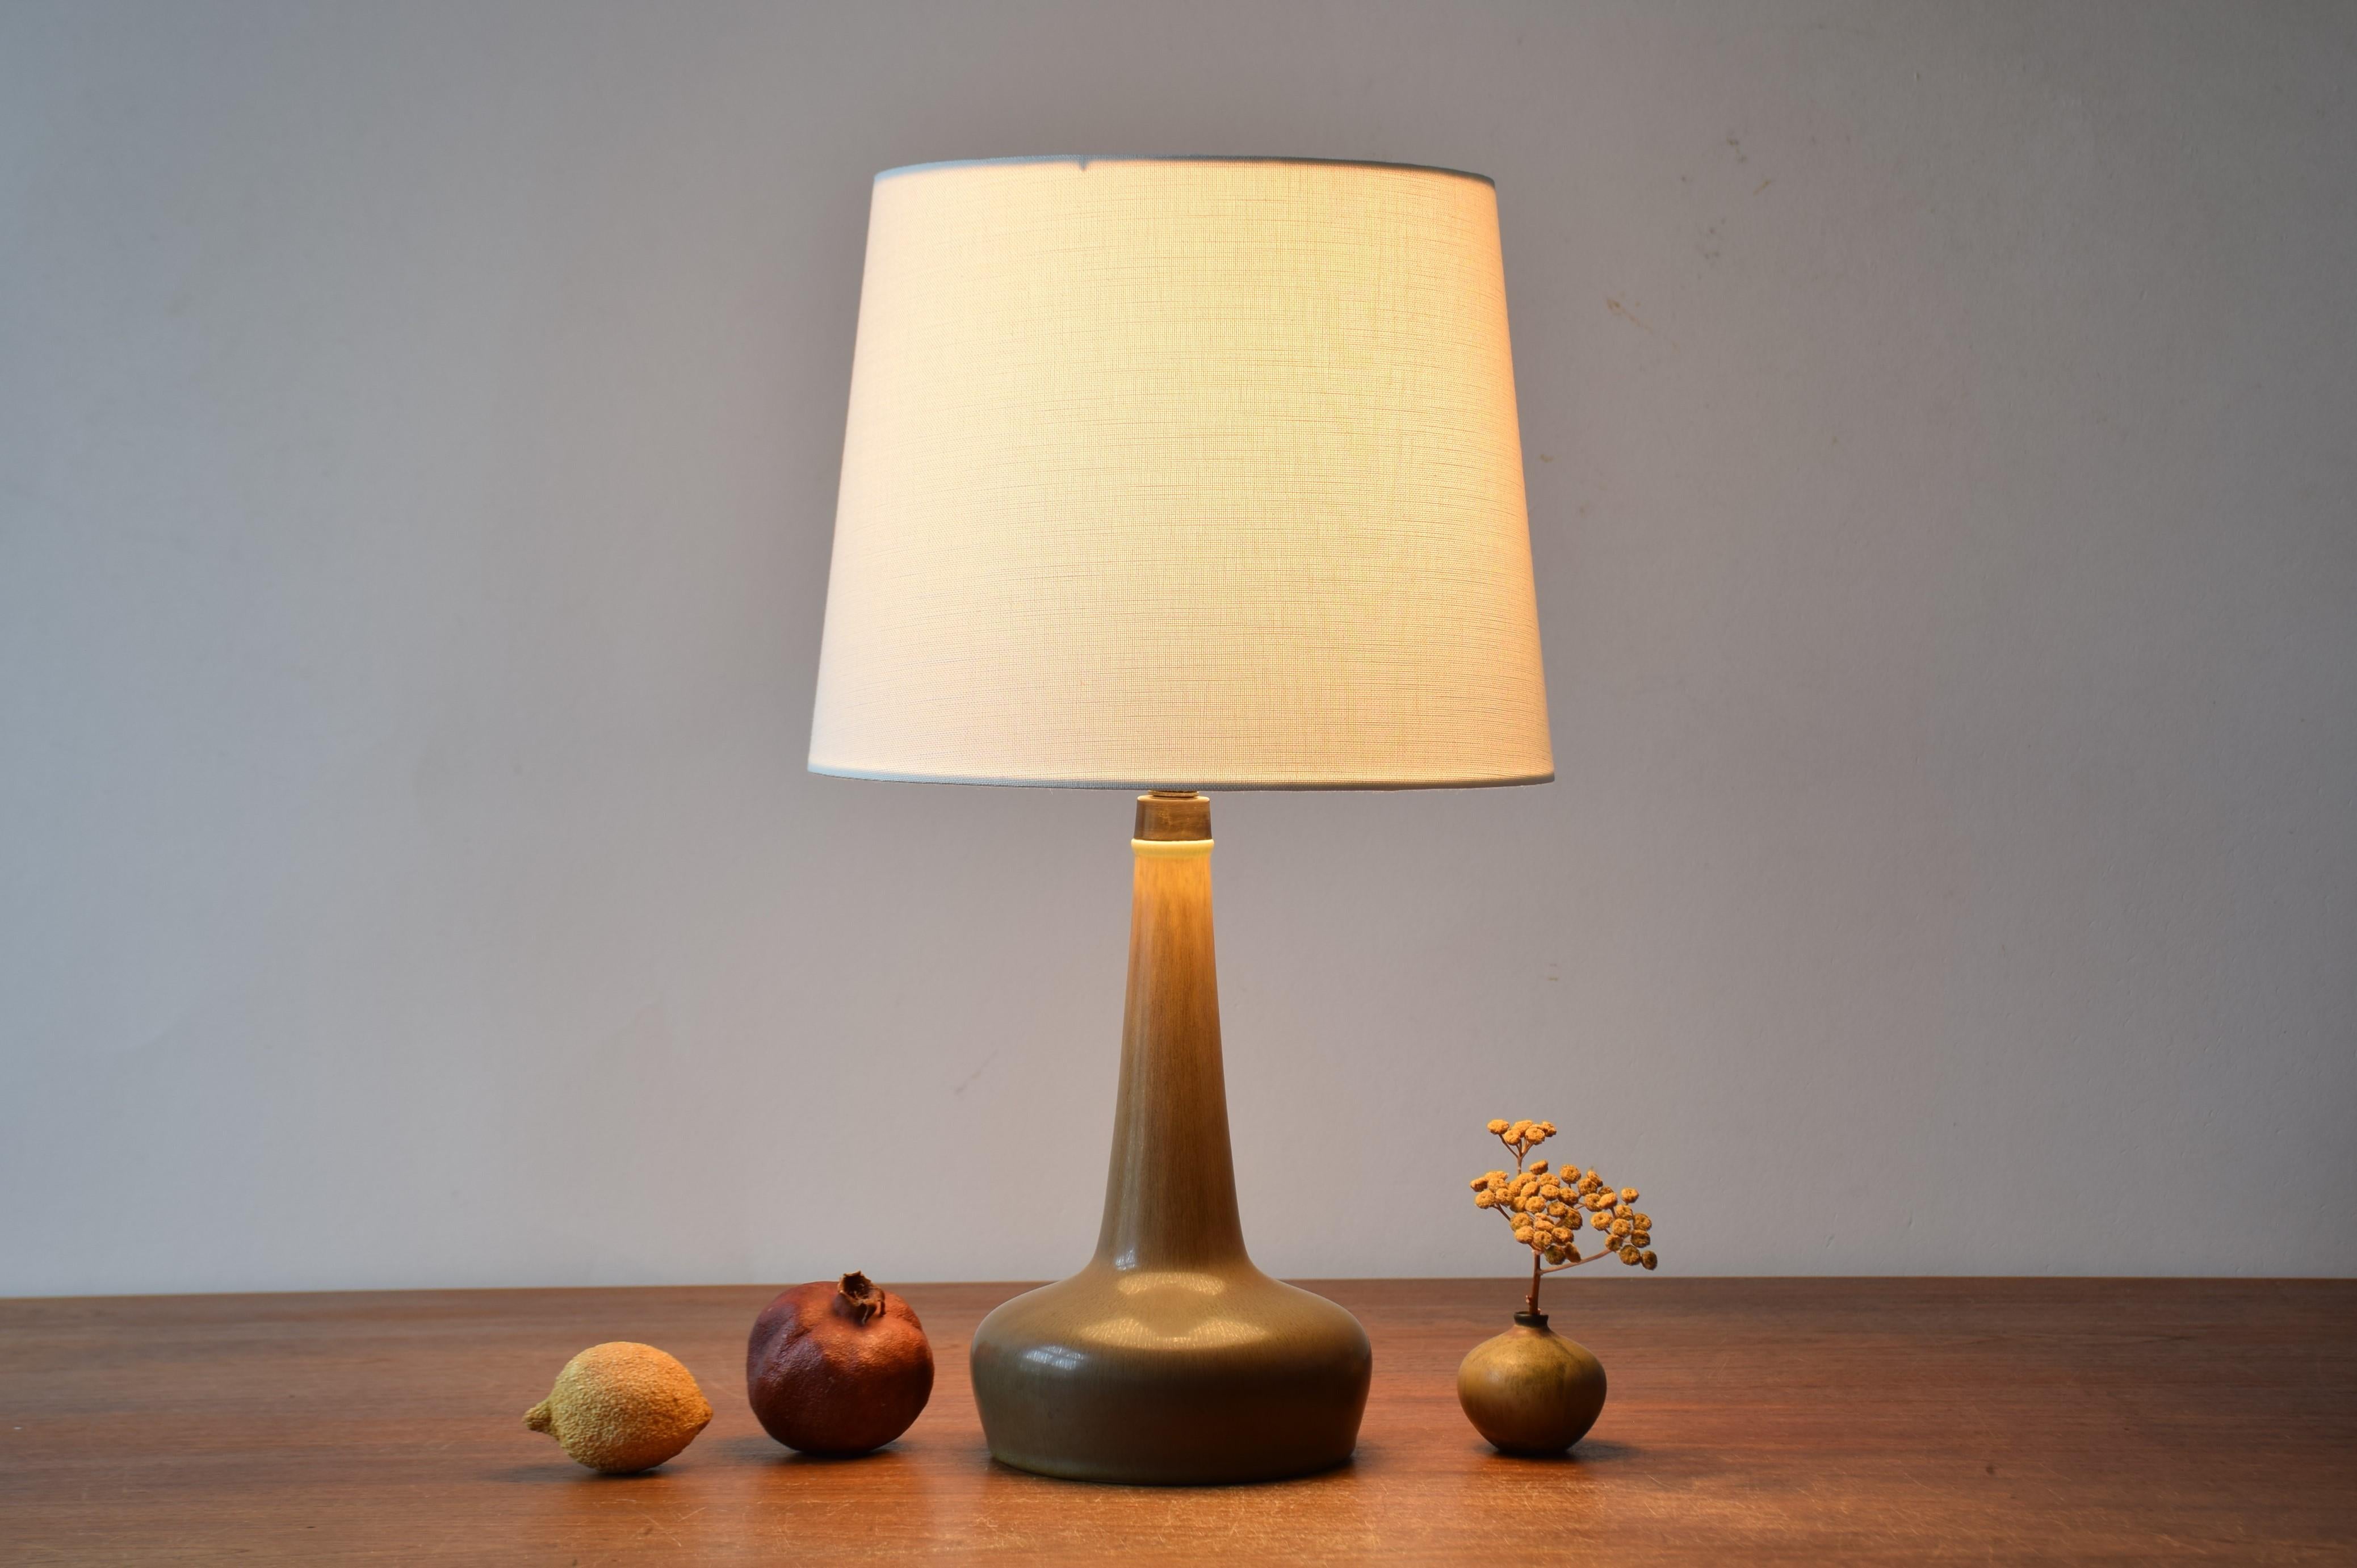 Palshus / Le Klint table lamp with brown haresfur glaze and patinated brass top.
This lamp was designed by Esben Klint and made at the Danish ceramic studio Palshus for the Danish lamp manufacturer Le Klint. Made circa 1960s.

Marked: Palshus